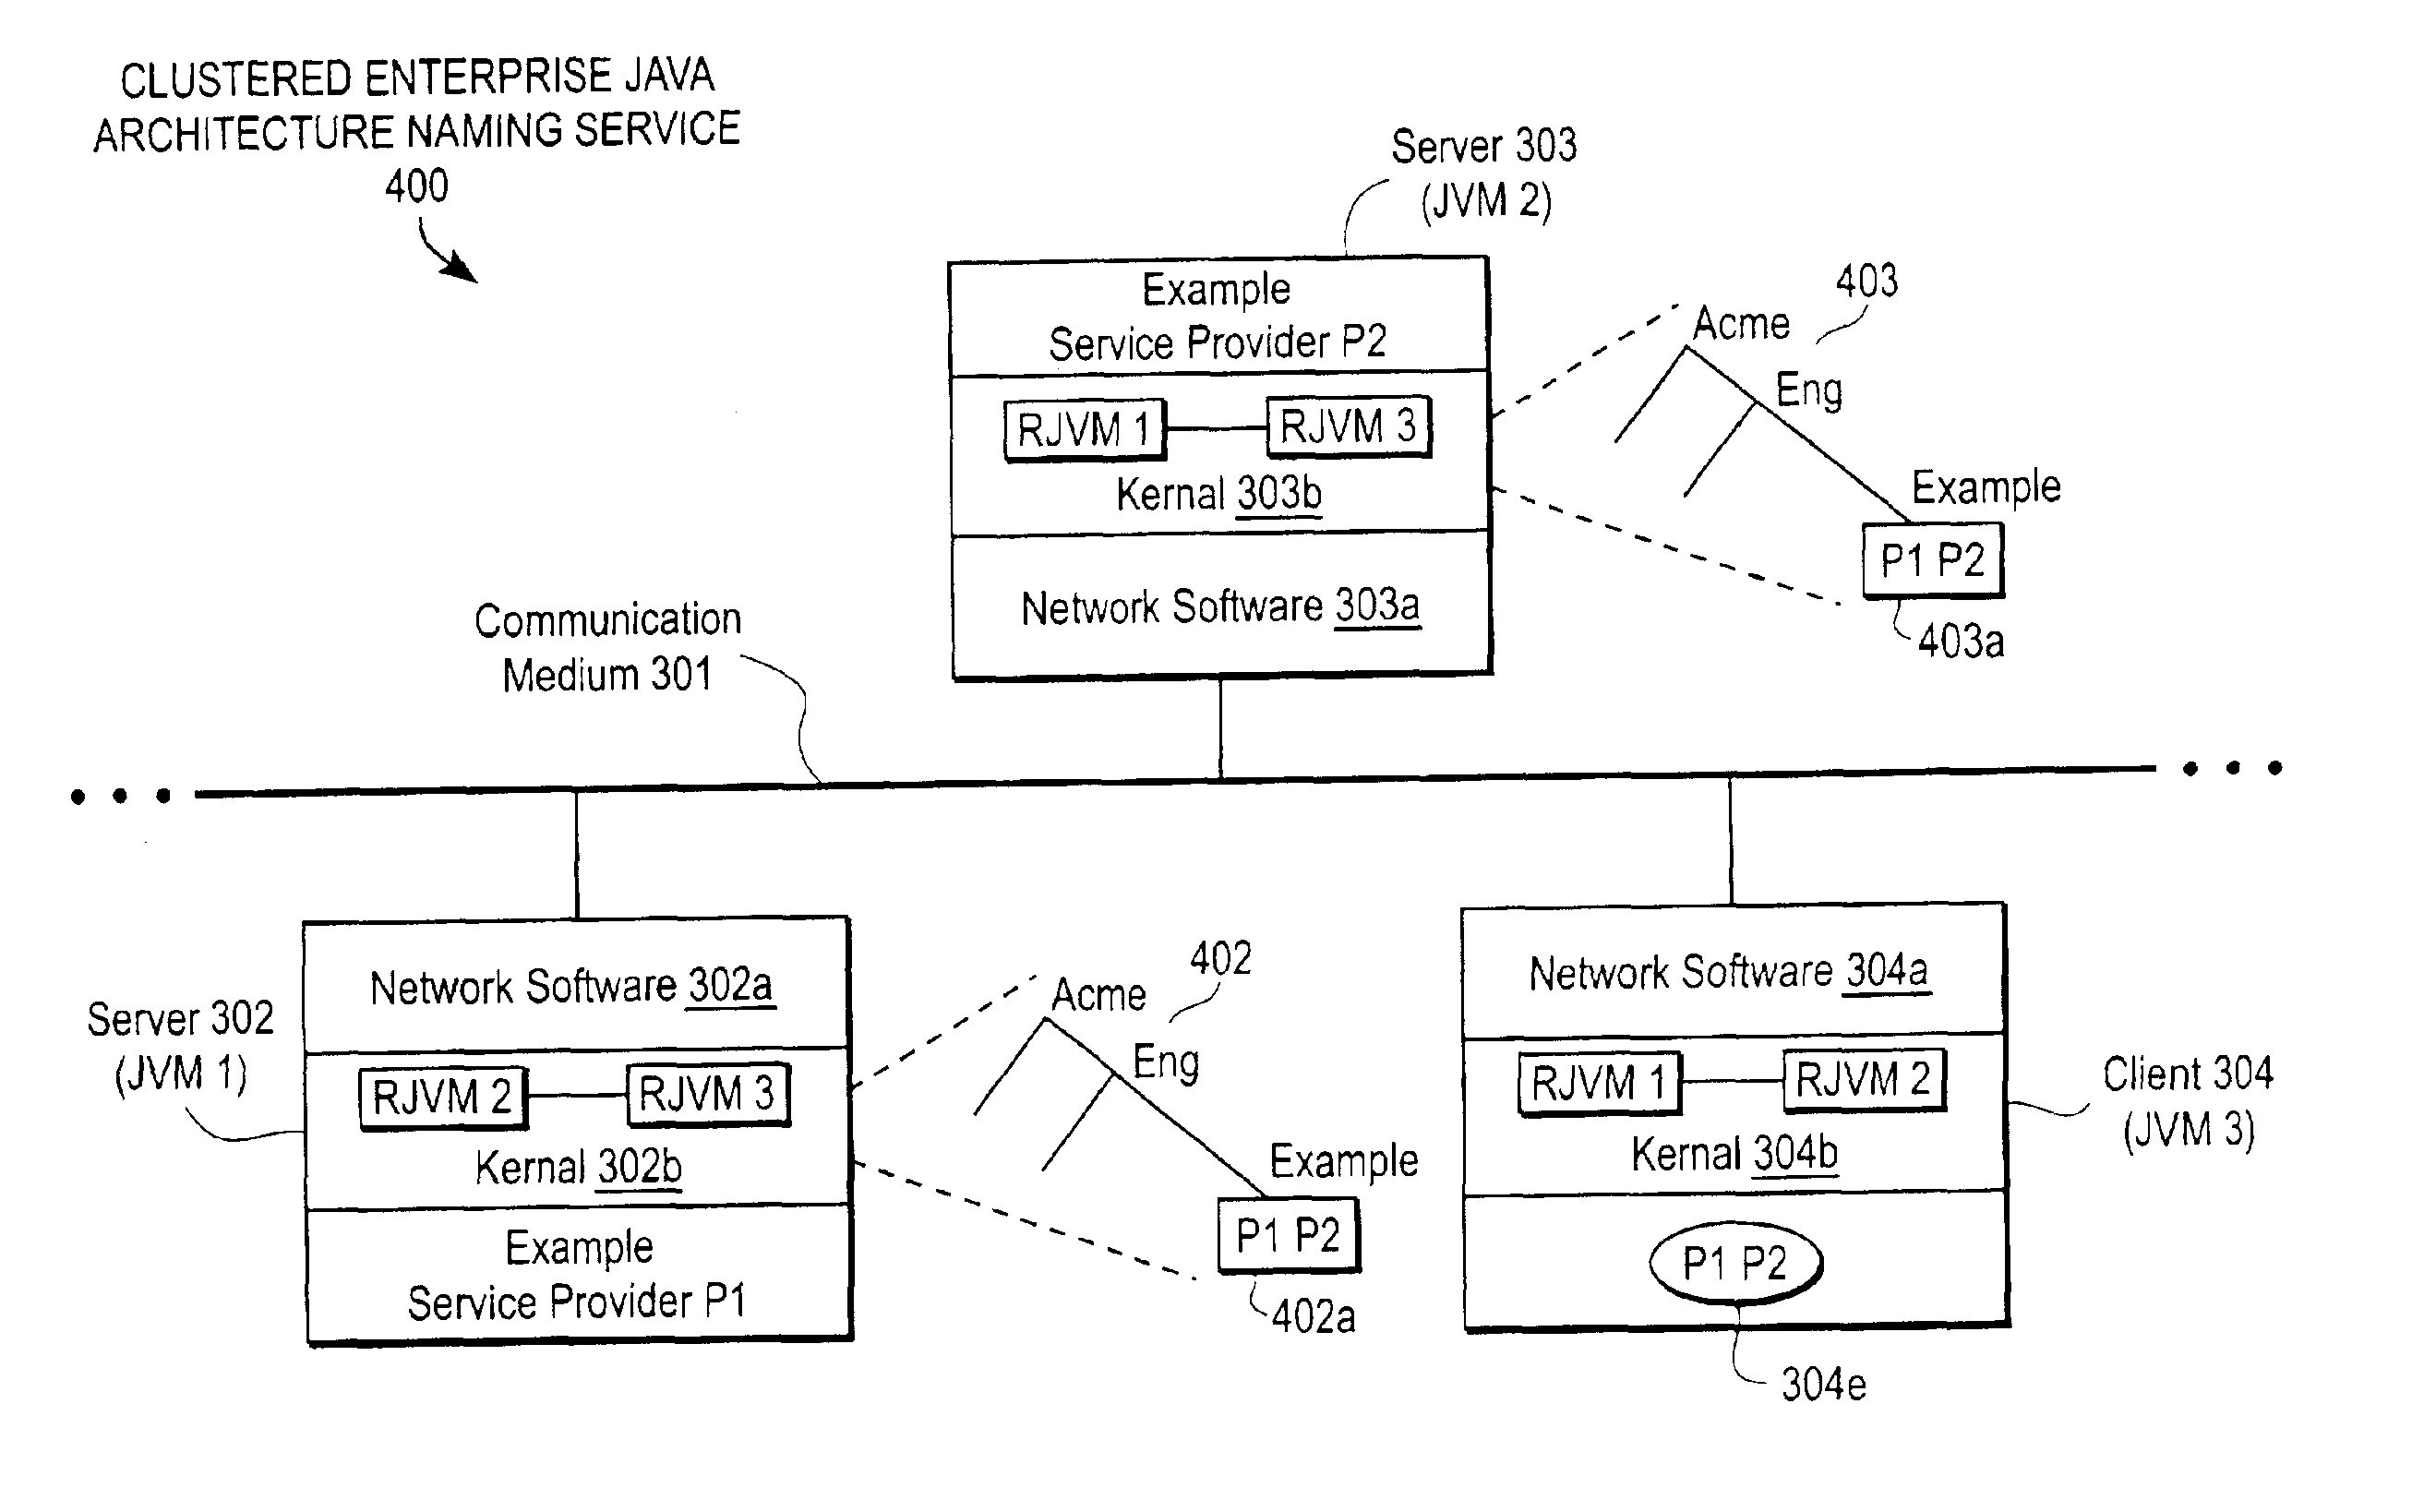 Clustered enterprise Java(TM) in a secure distributed processing system